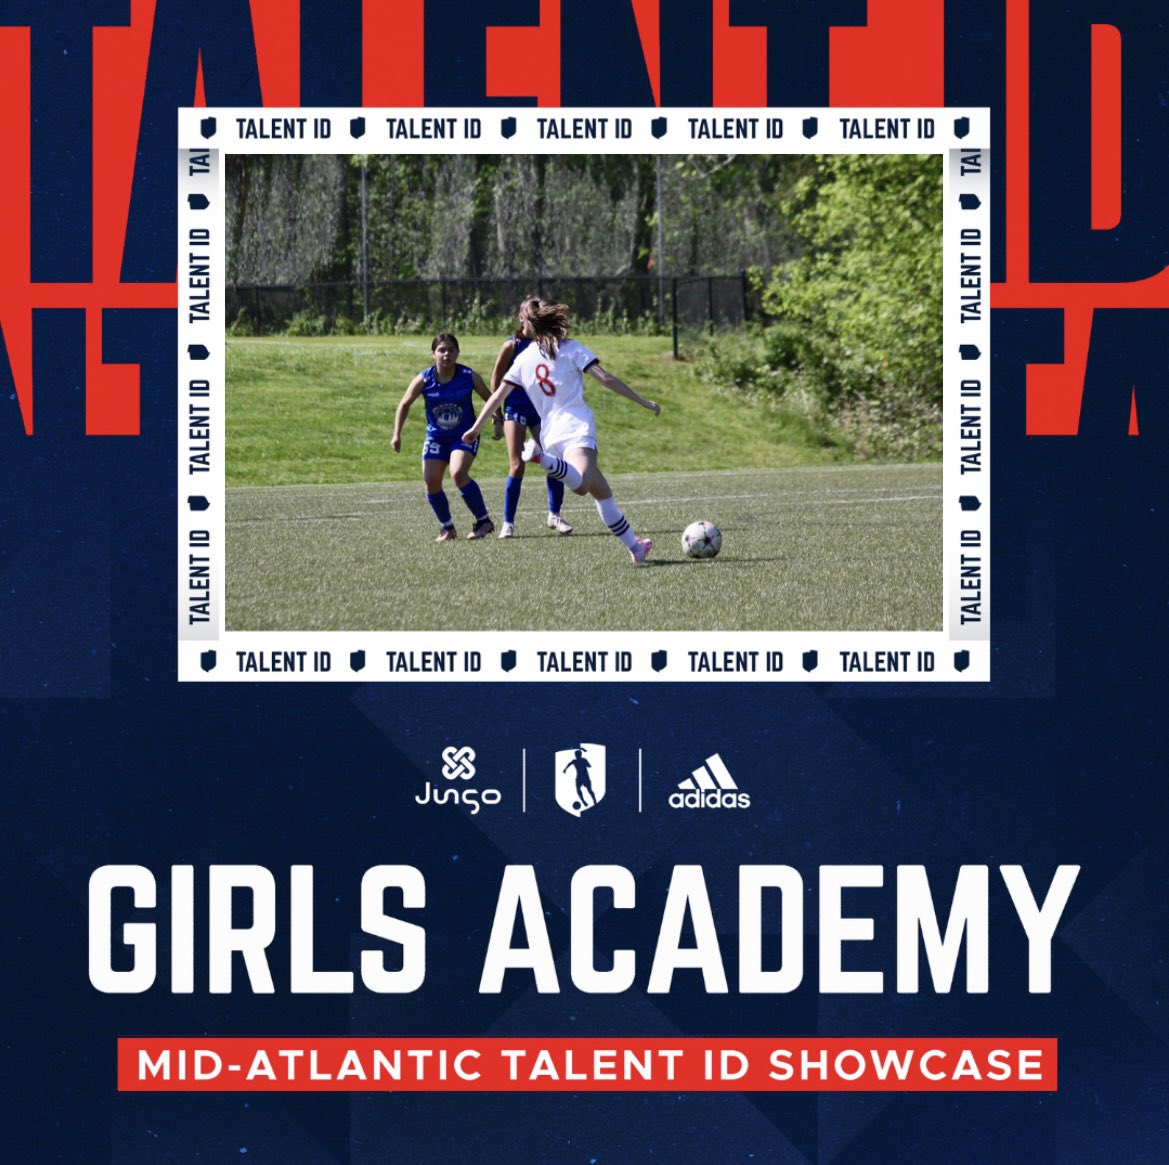 So honored to receive an invite to the @GAcademyLeague Mid-Atlantic Talent ID!! So excited for this opportunity‼️ @TopDrawerSoccer @Century_Utd @CoachEMarshall @ImYouthSoccer